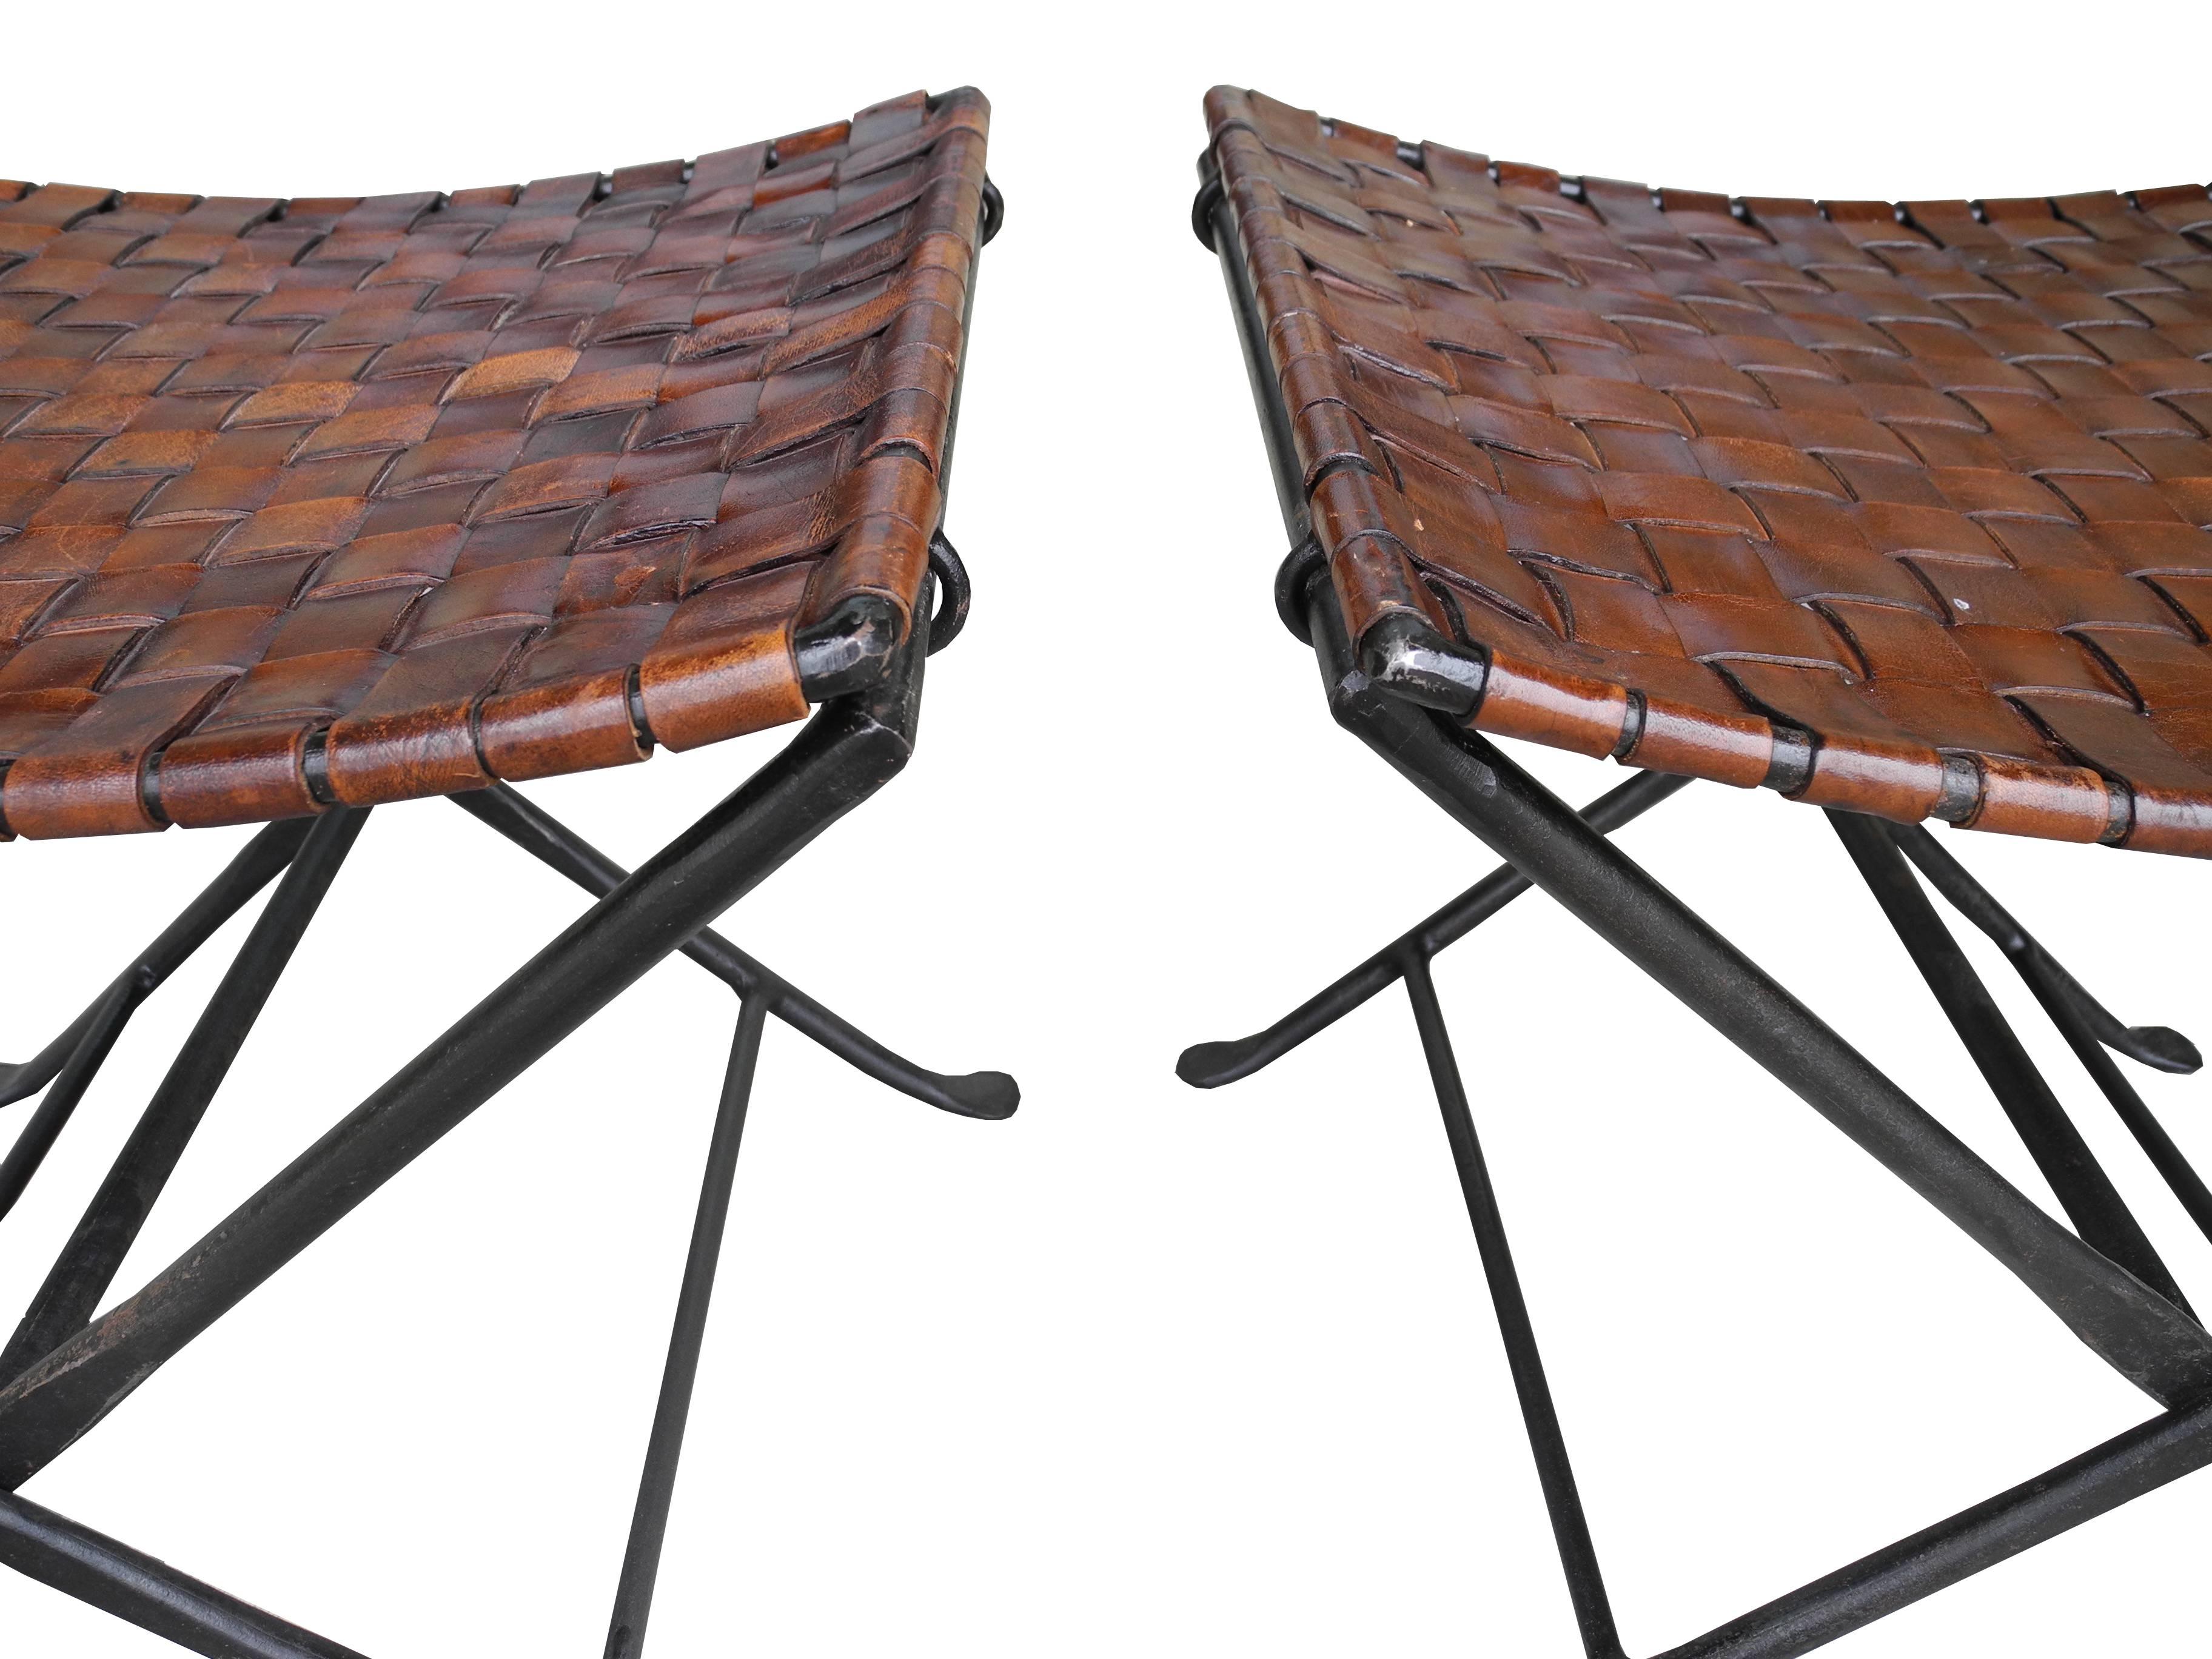 Mid-Century Modern Vintage Modern Hand-Forged Metal and Leather Strap Folding Stools or Benches For Sale